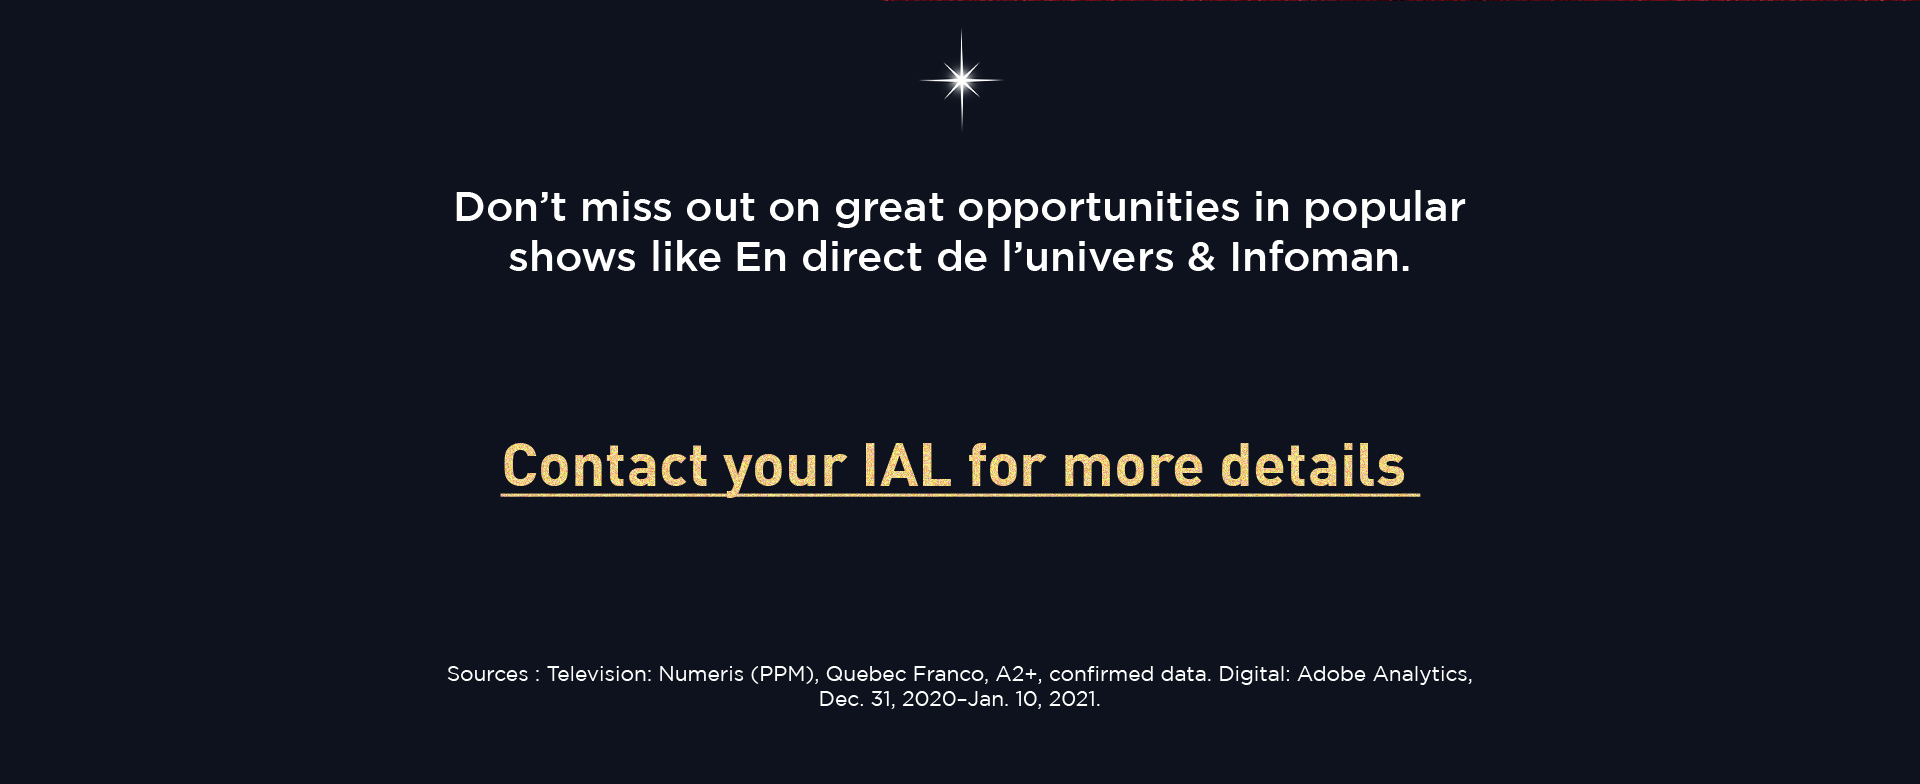 Don't miss out on great opportunities in popular shows like En direct de l'univers & Infoman.